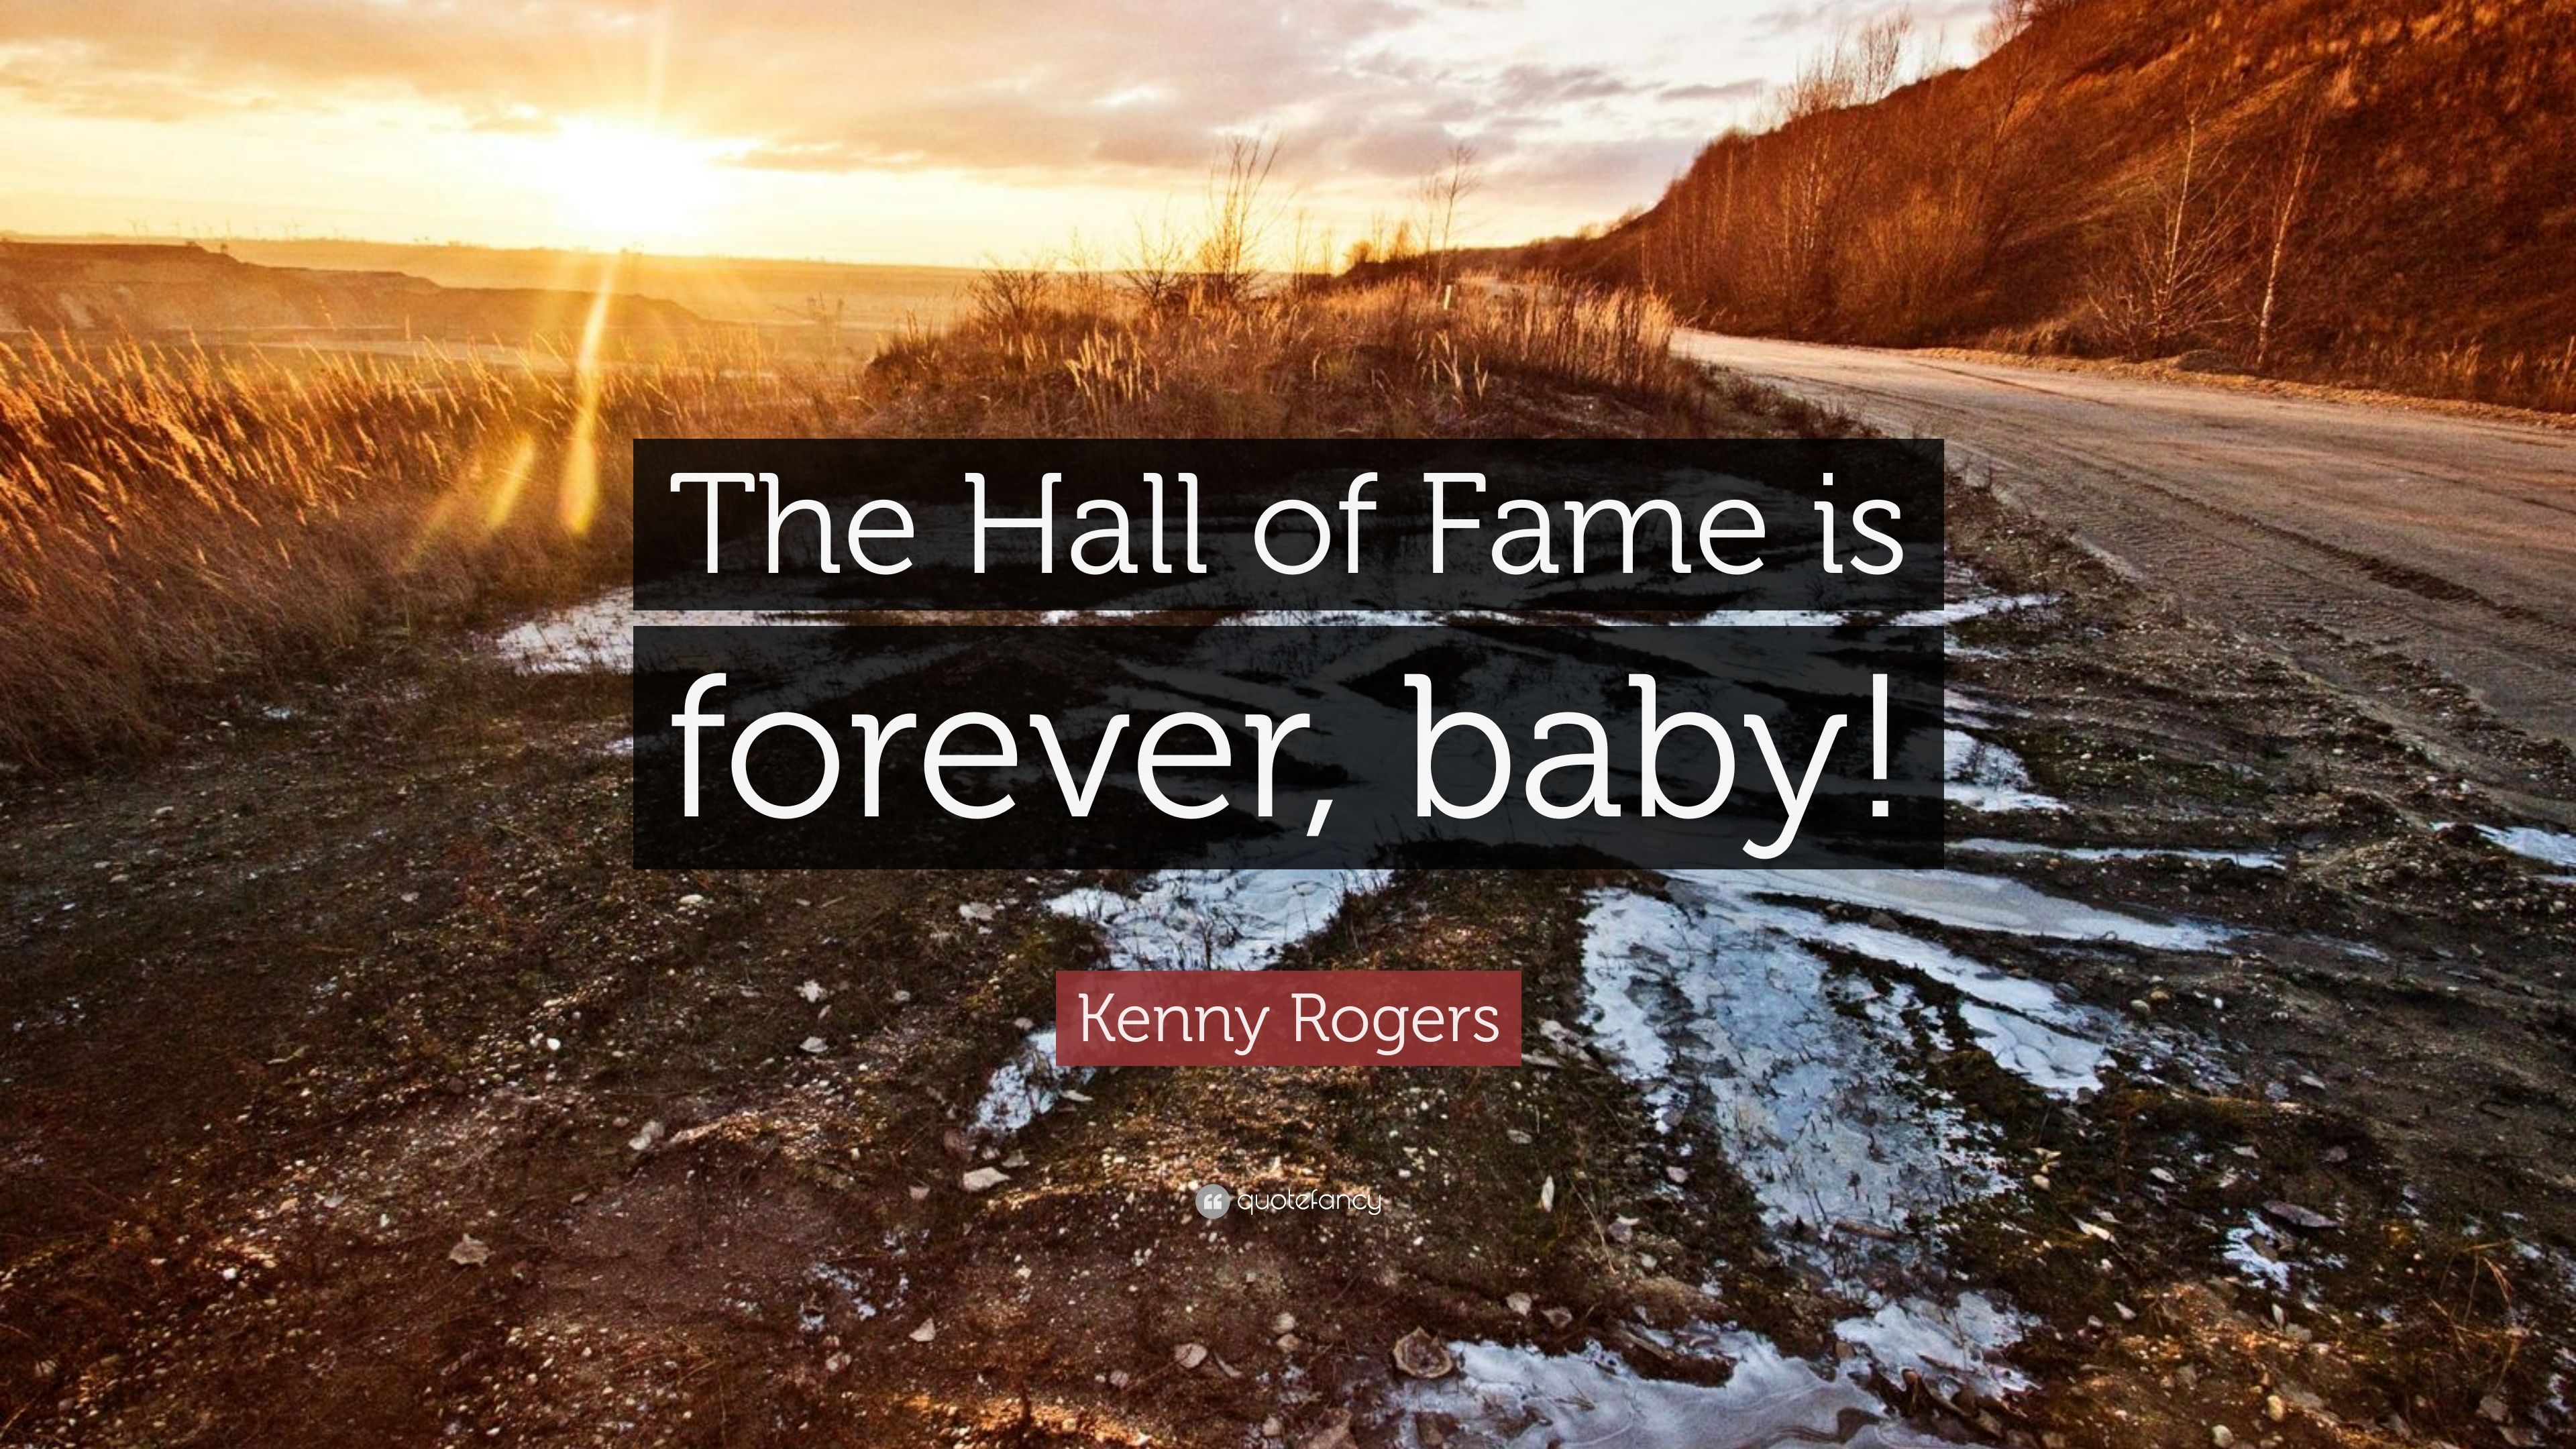 Kenny Rogers Quote: “The Hall of Fame is forever, baby!” 7